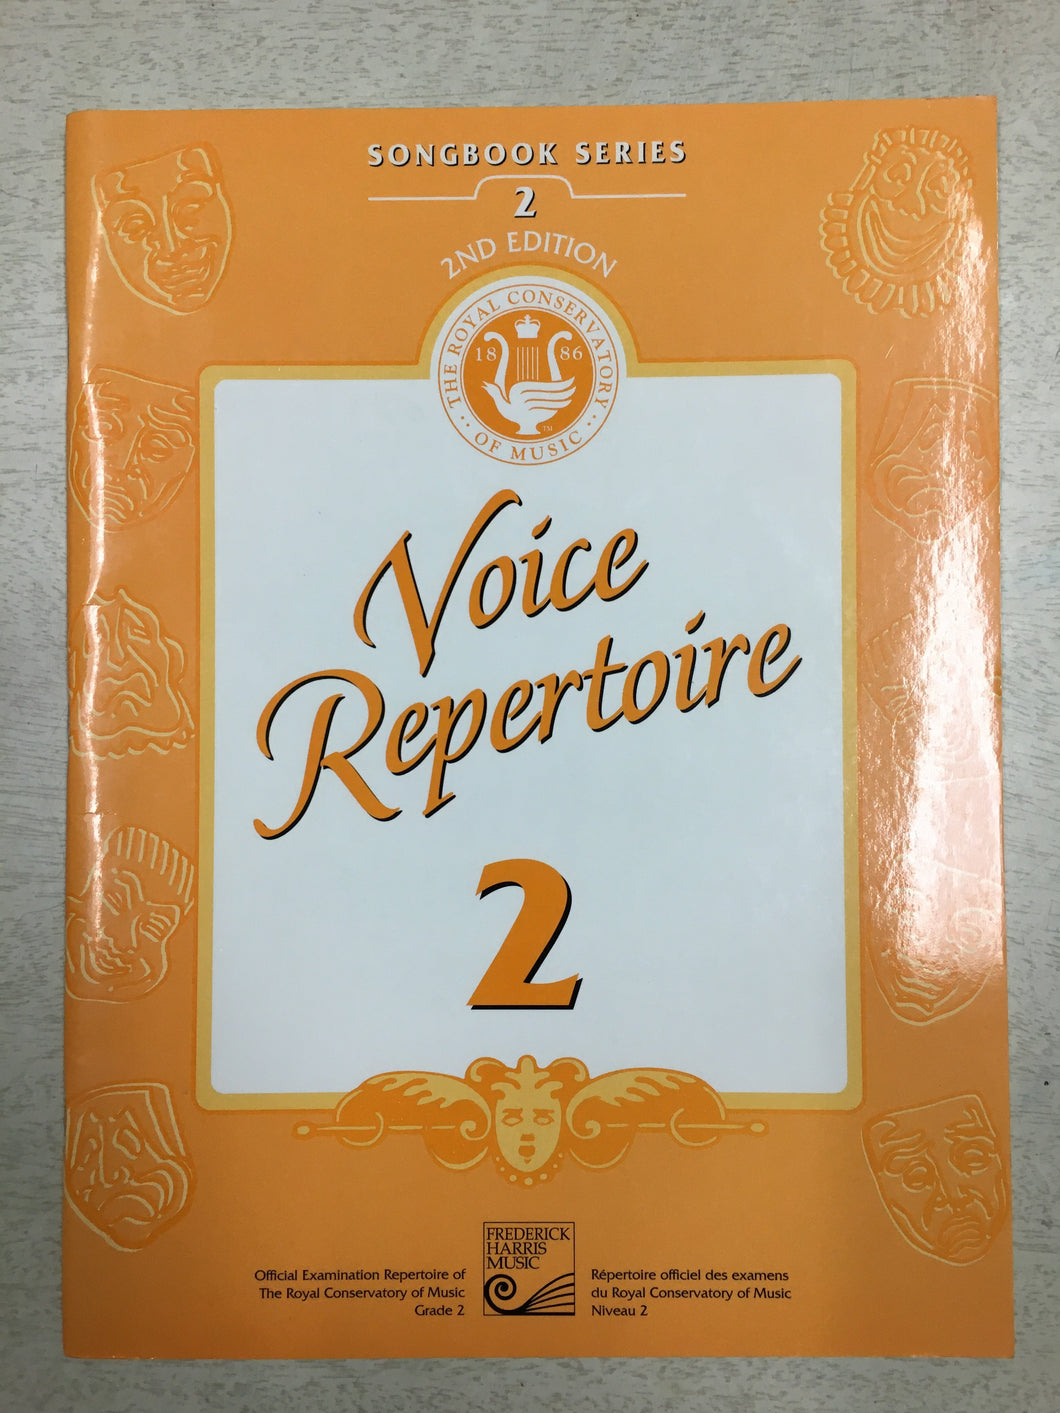 Songbook Series Voice Repertoire 2nd Edition -Grade 2 RCM (1998)